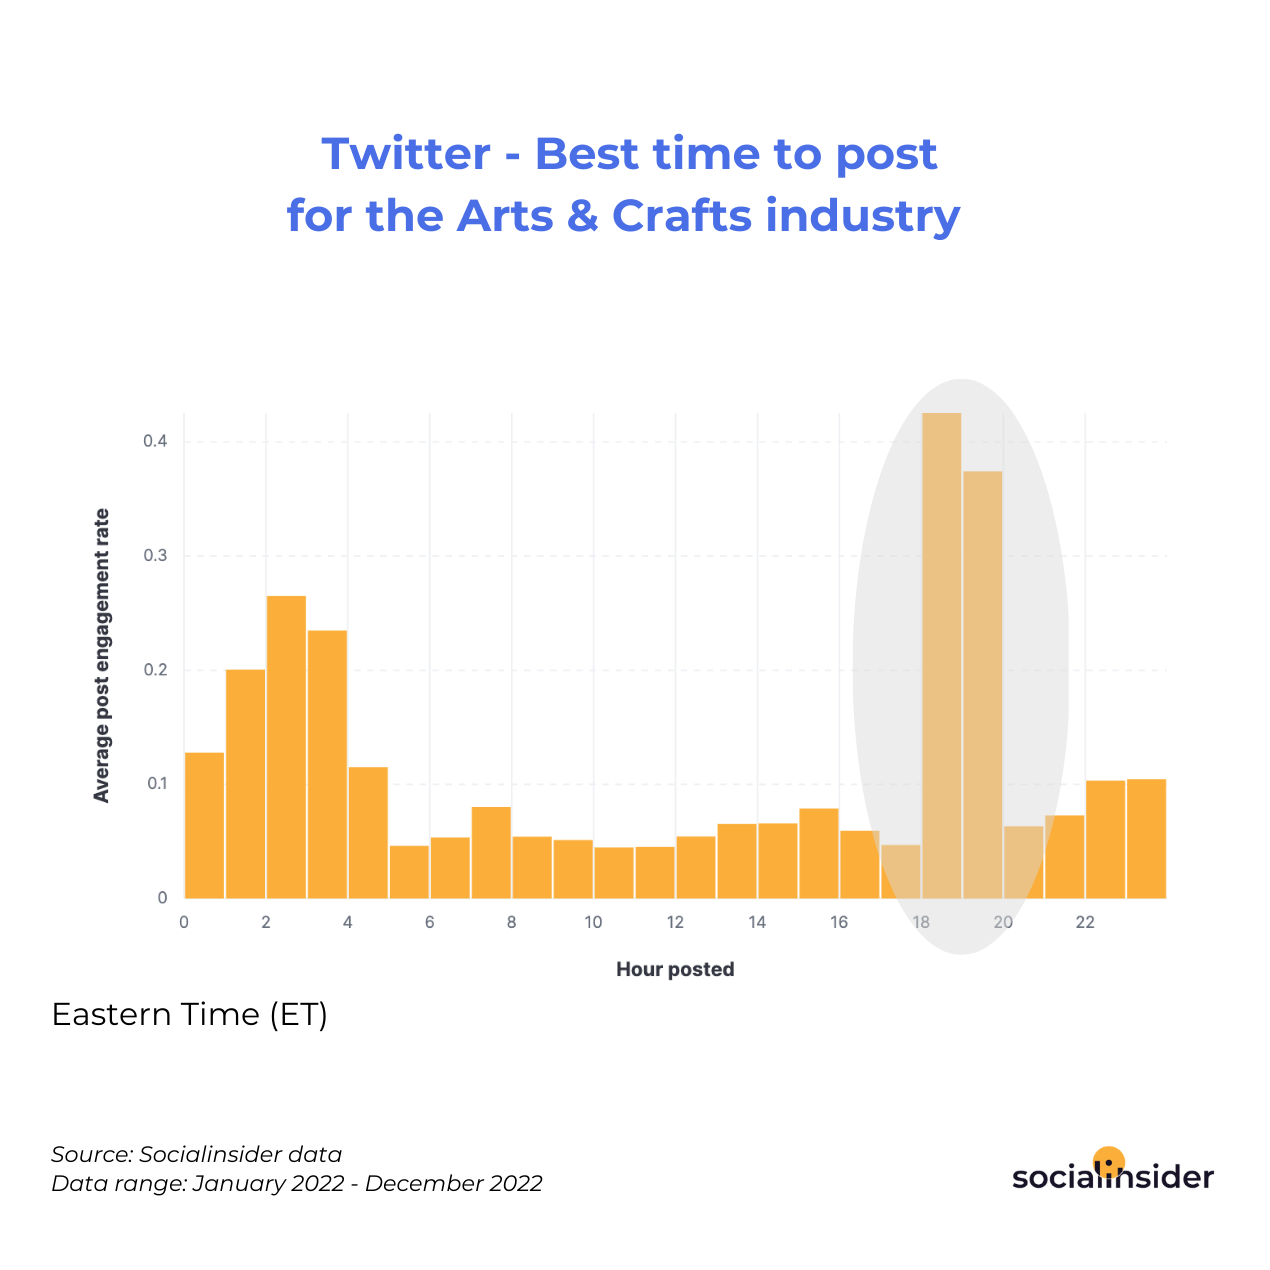 Twitter - Best time to post for the Arts & Crafts industry